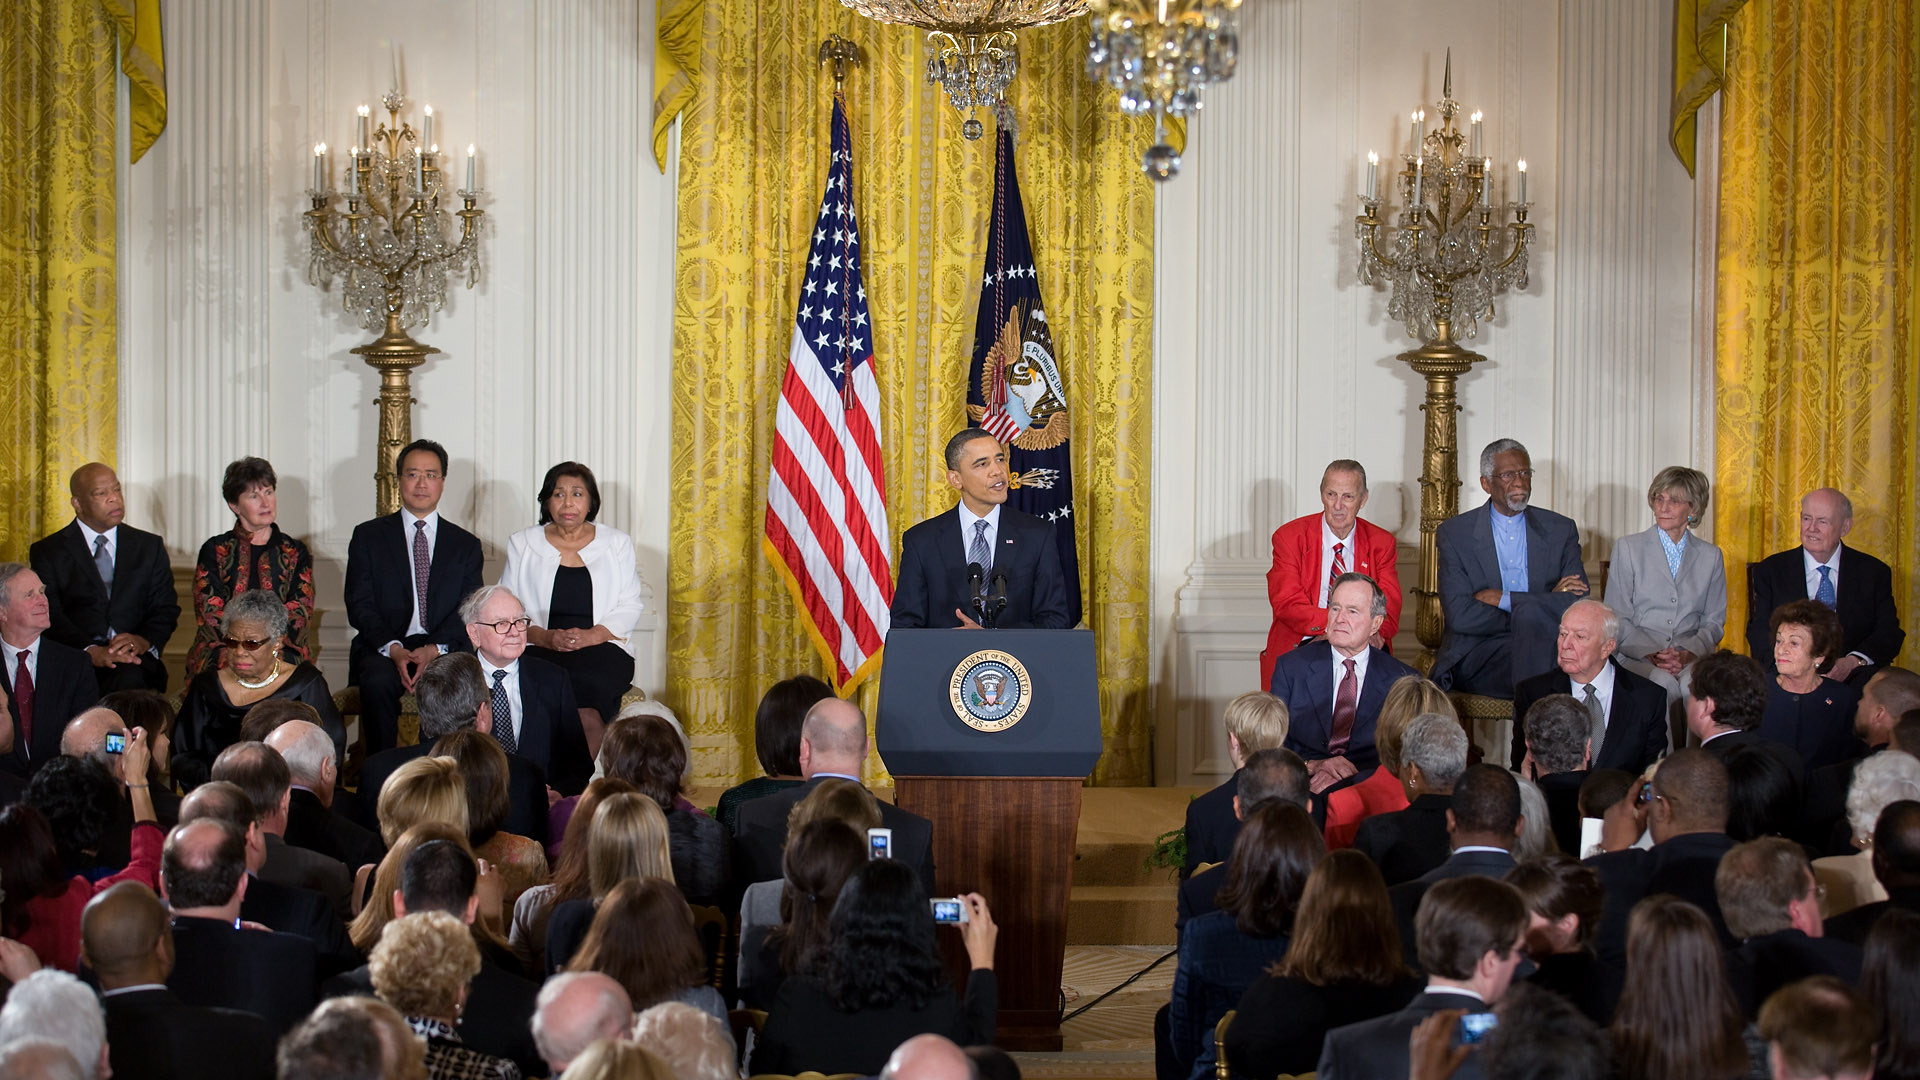 President Barack Obama addresses the audience before presenting the Medal of Freedom